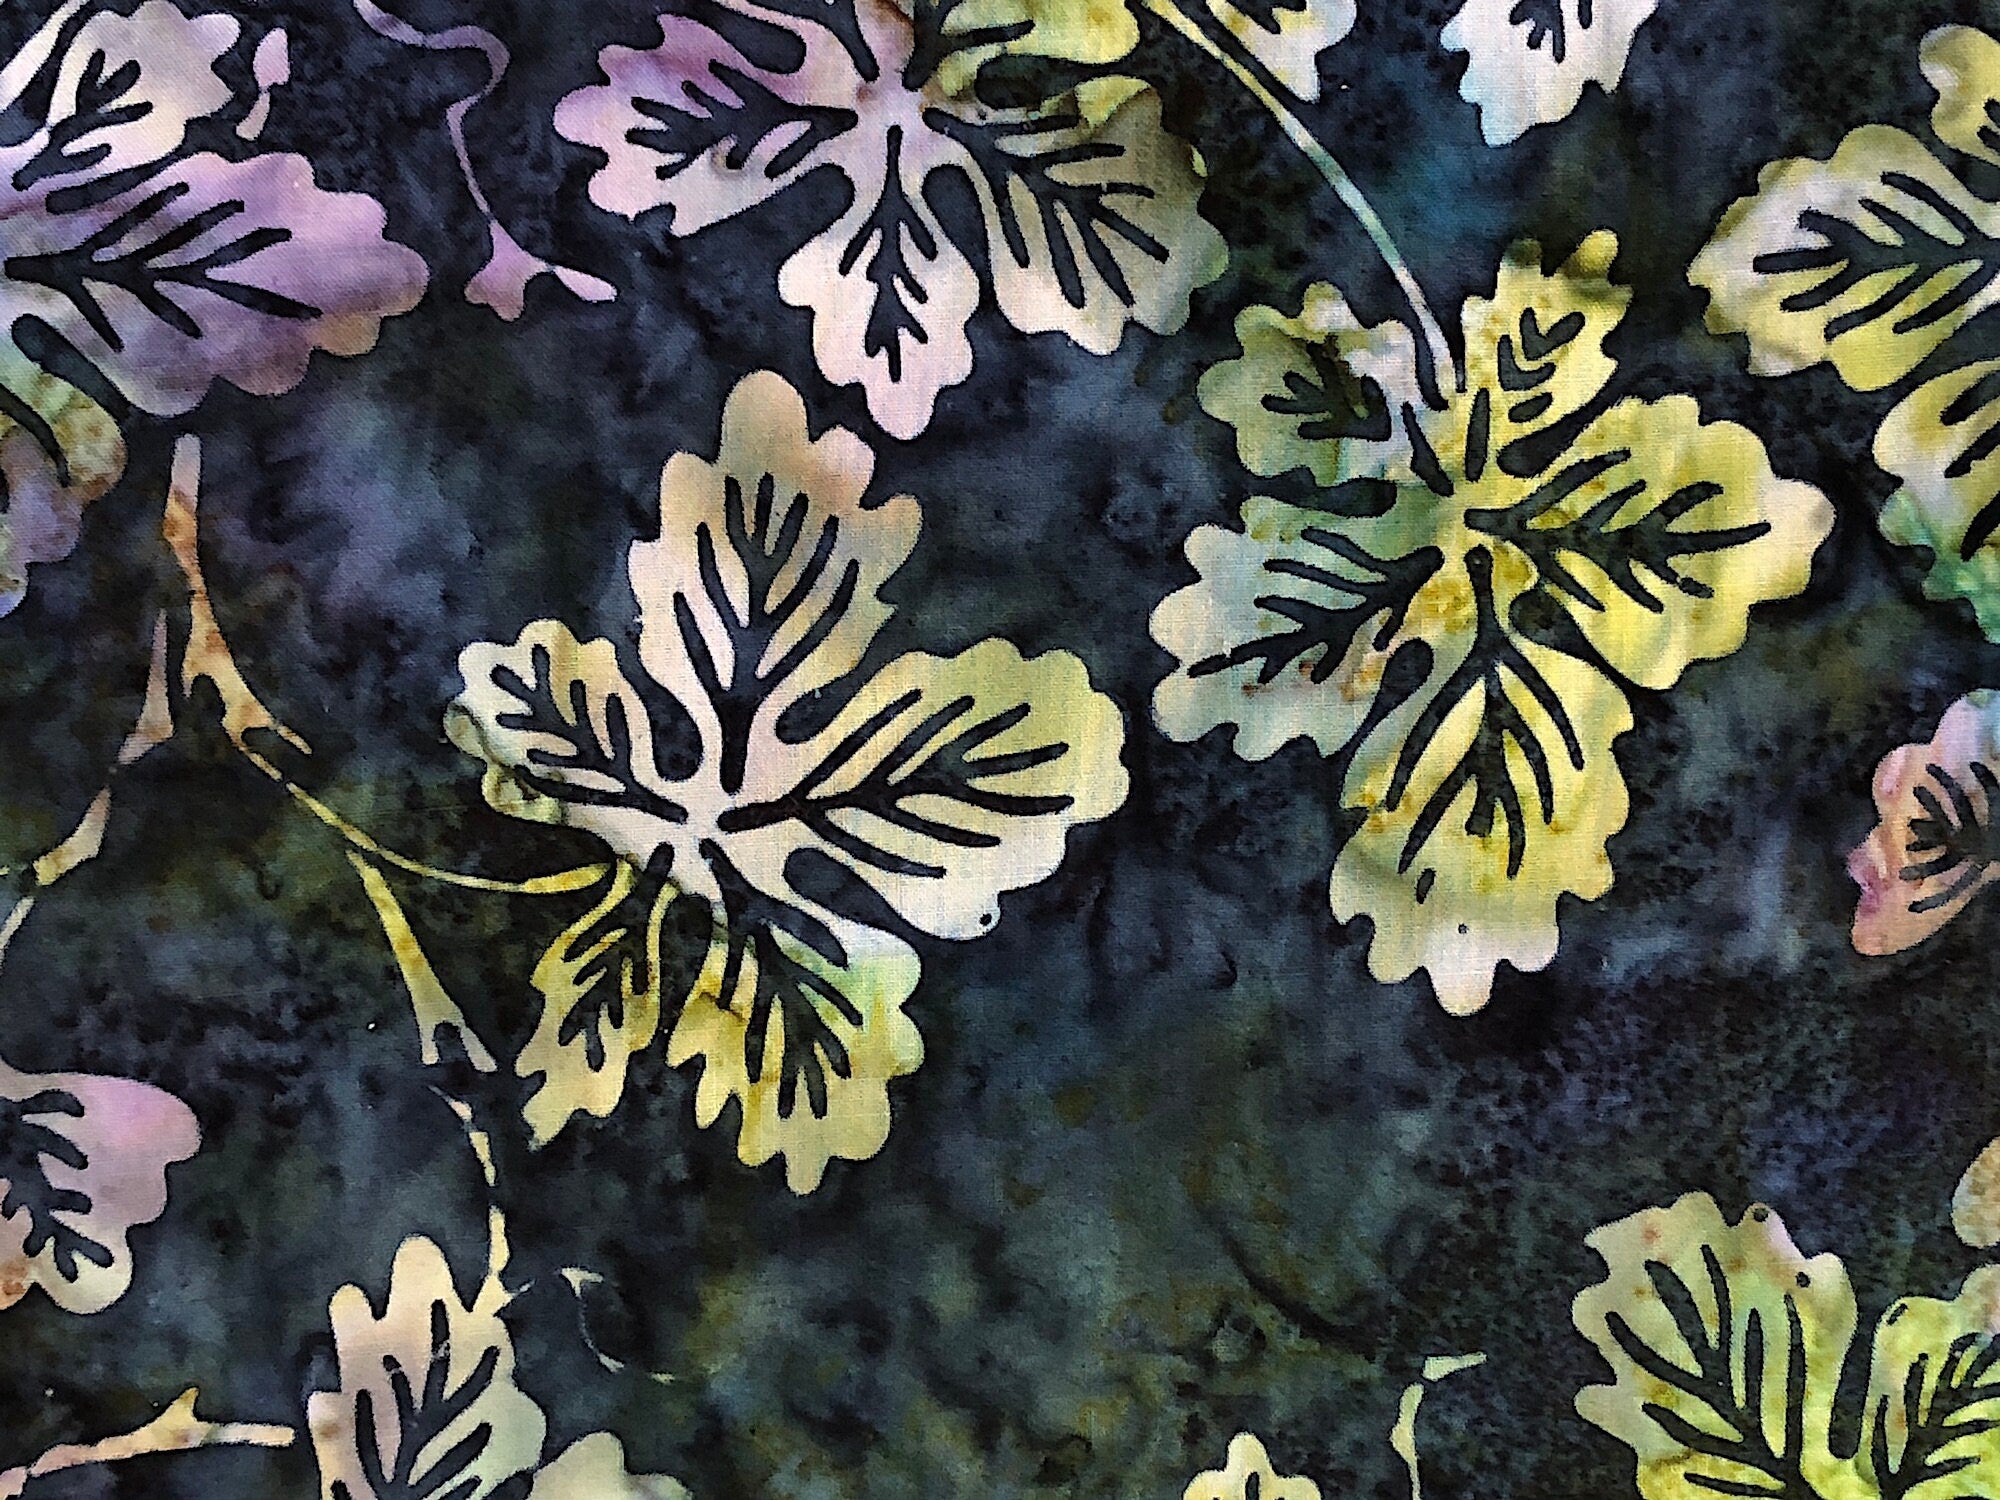 Close up of leaves that are shades of white, blue and yellow on a blue batik background.